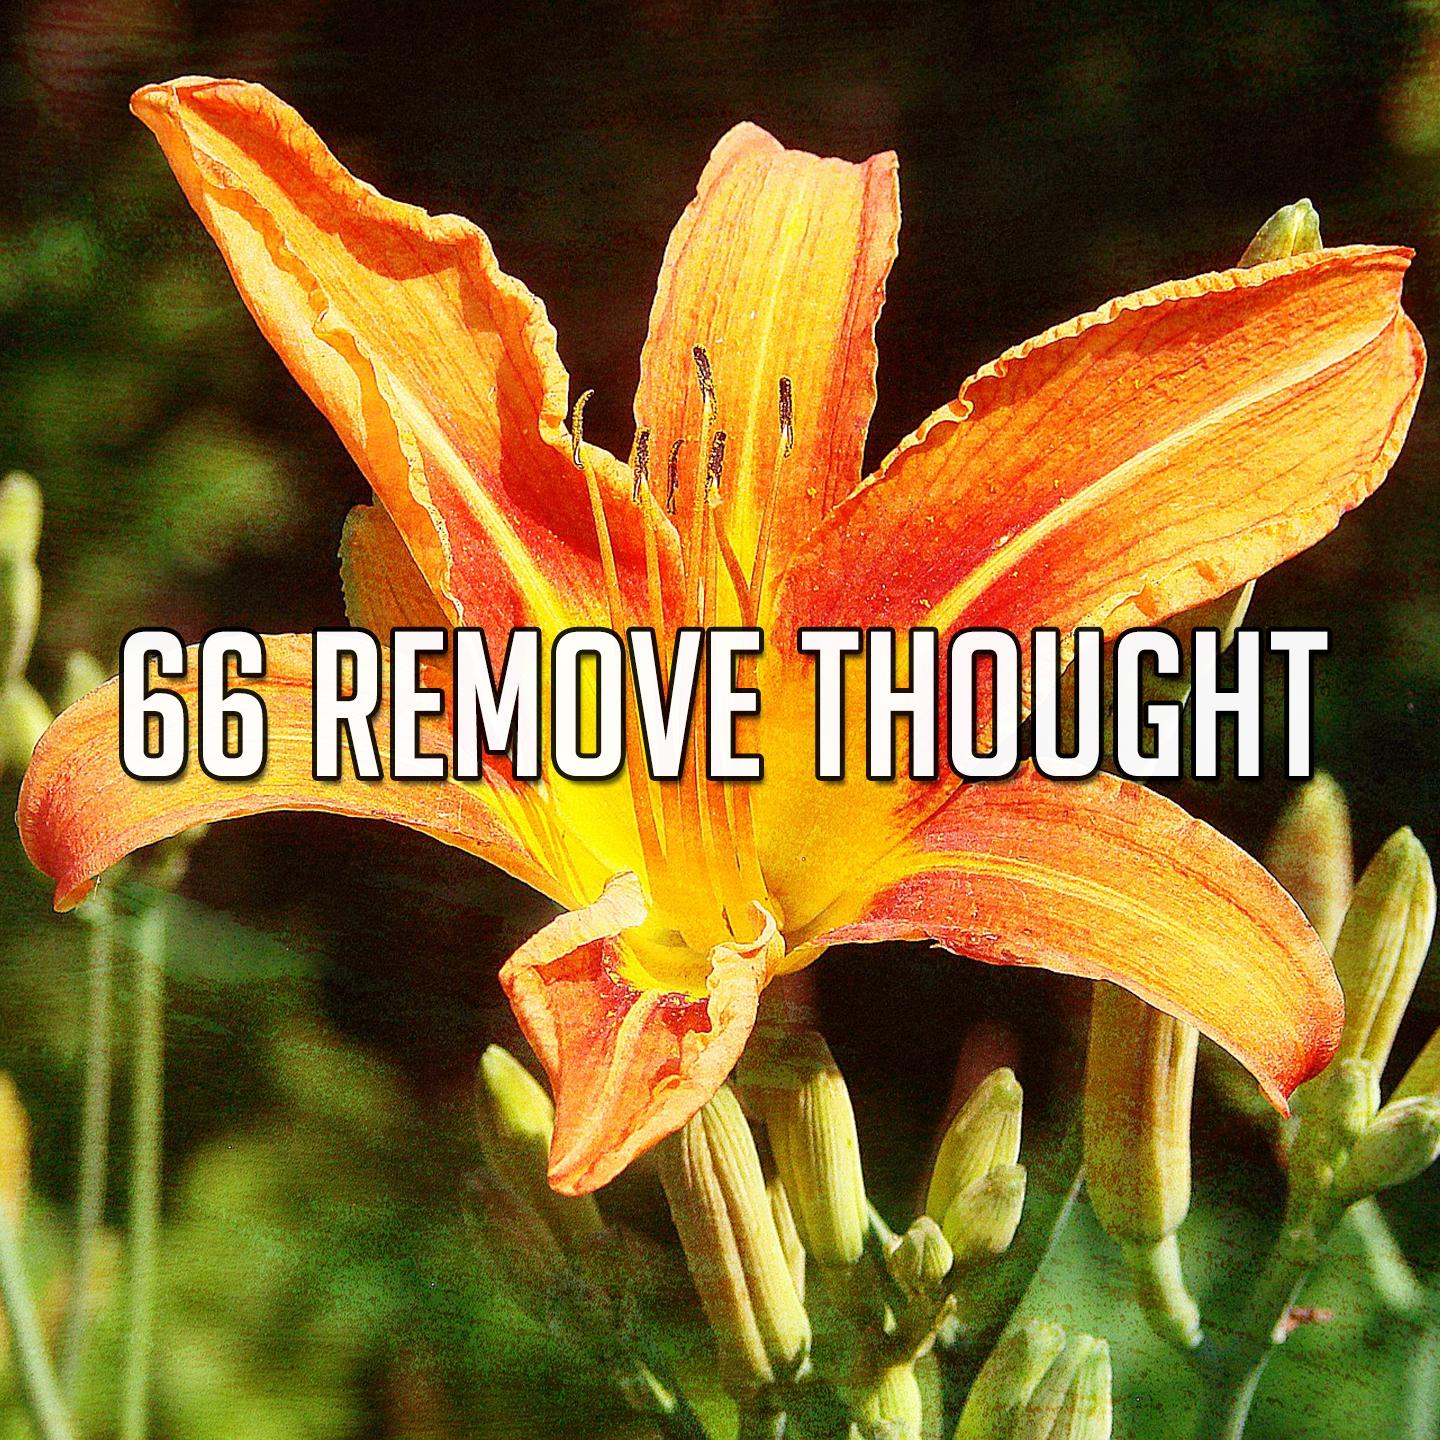 66 Remove Thought